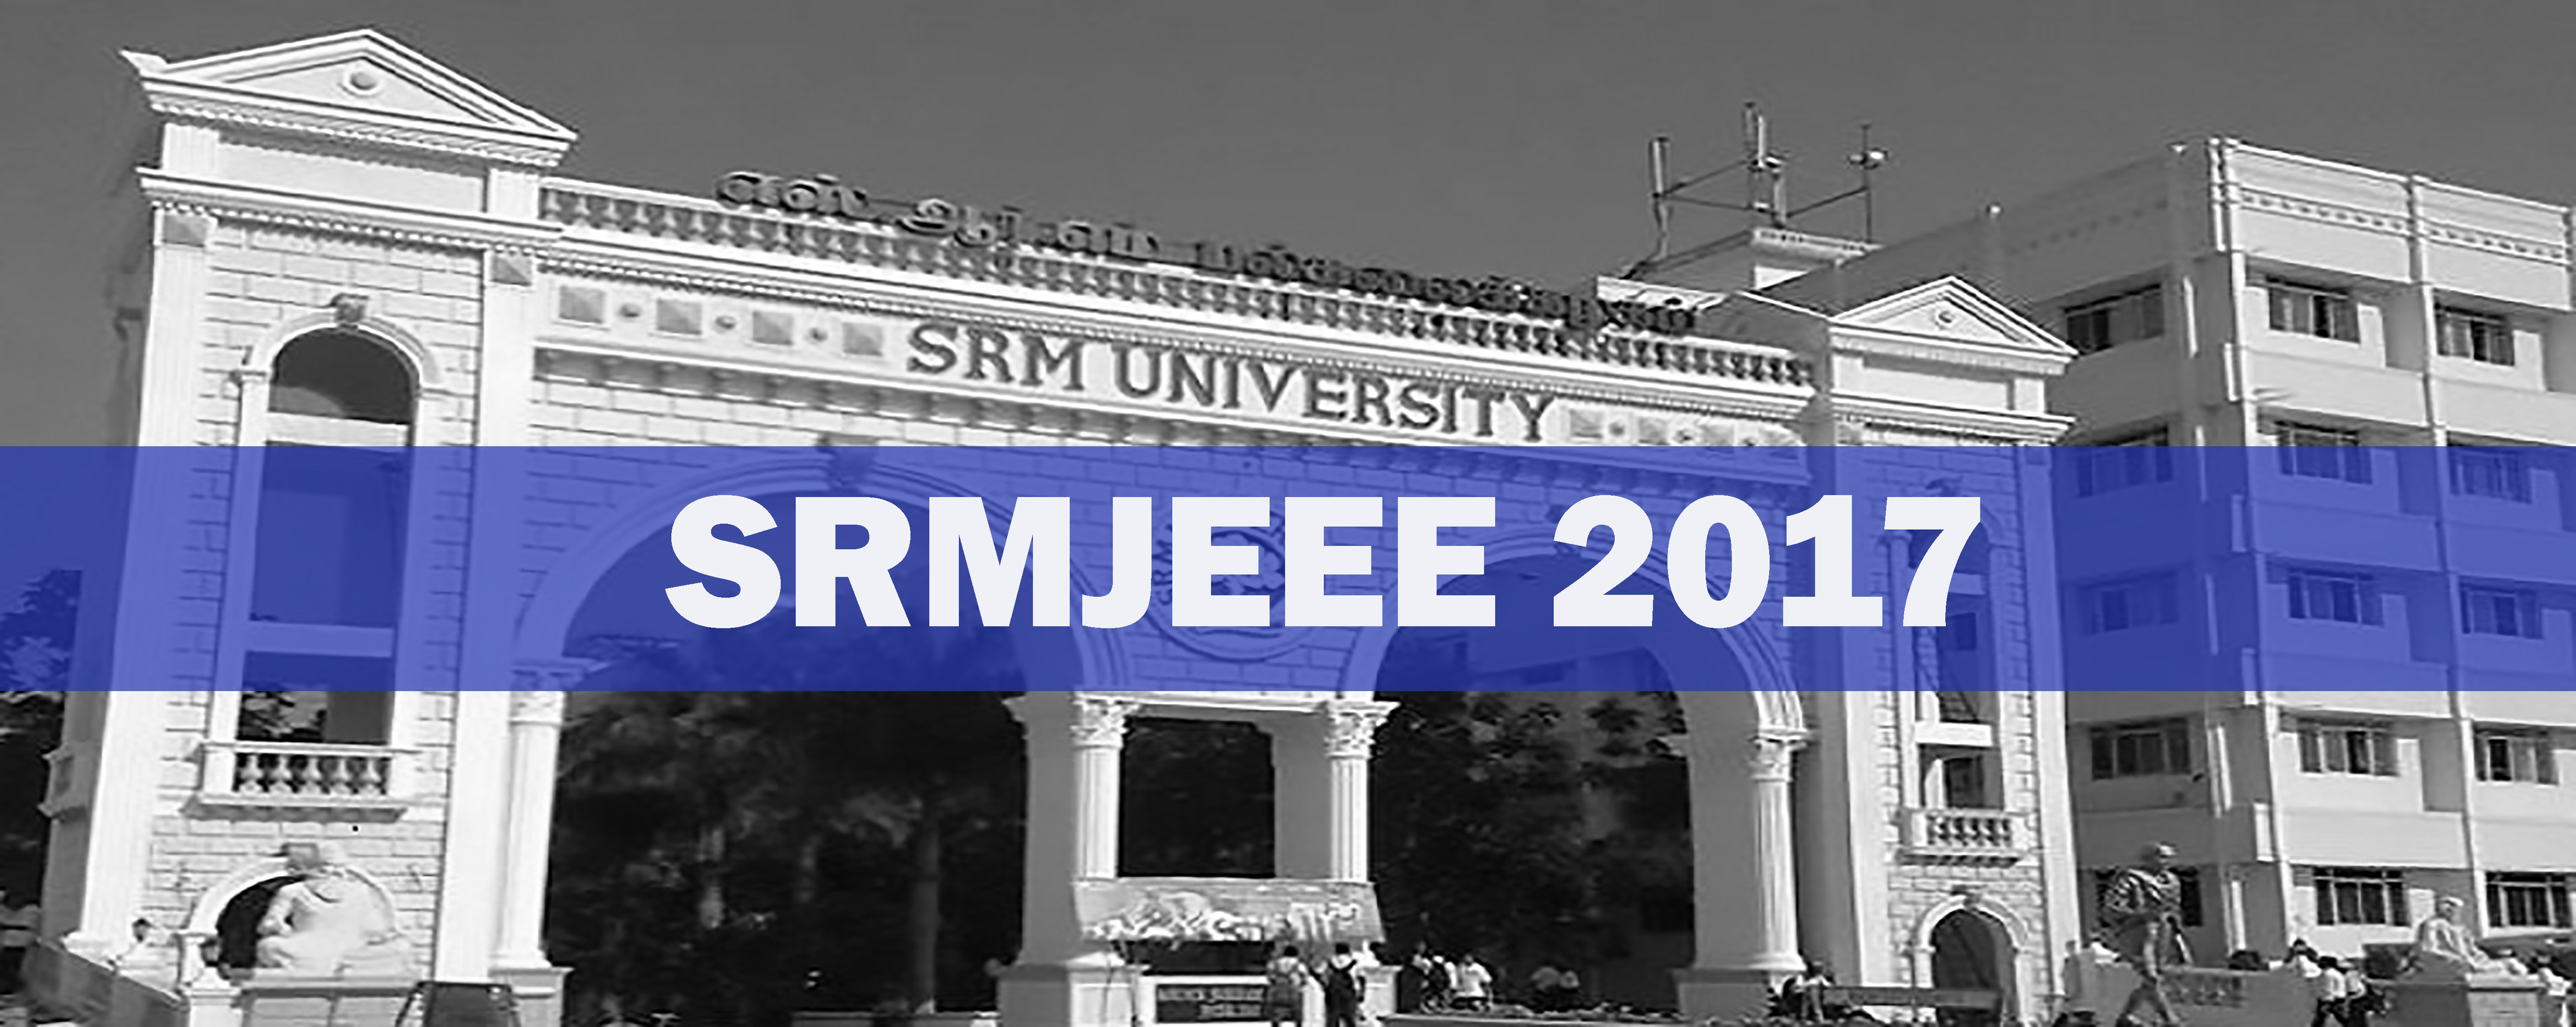 Last Date to apply for SRMJEEE 2017 has been extended till the 25th of April